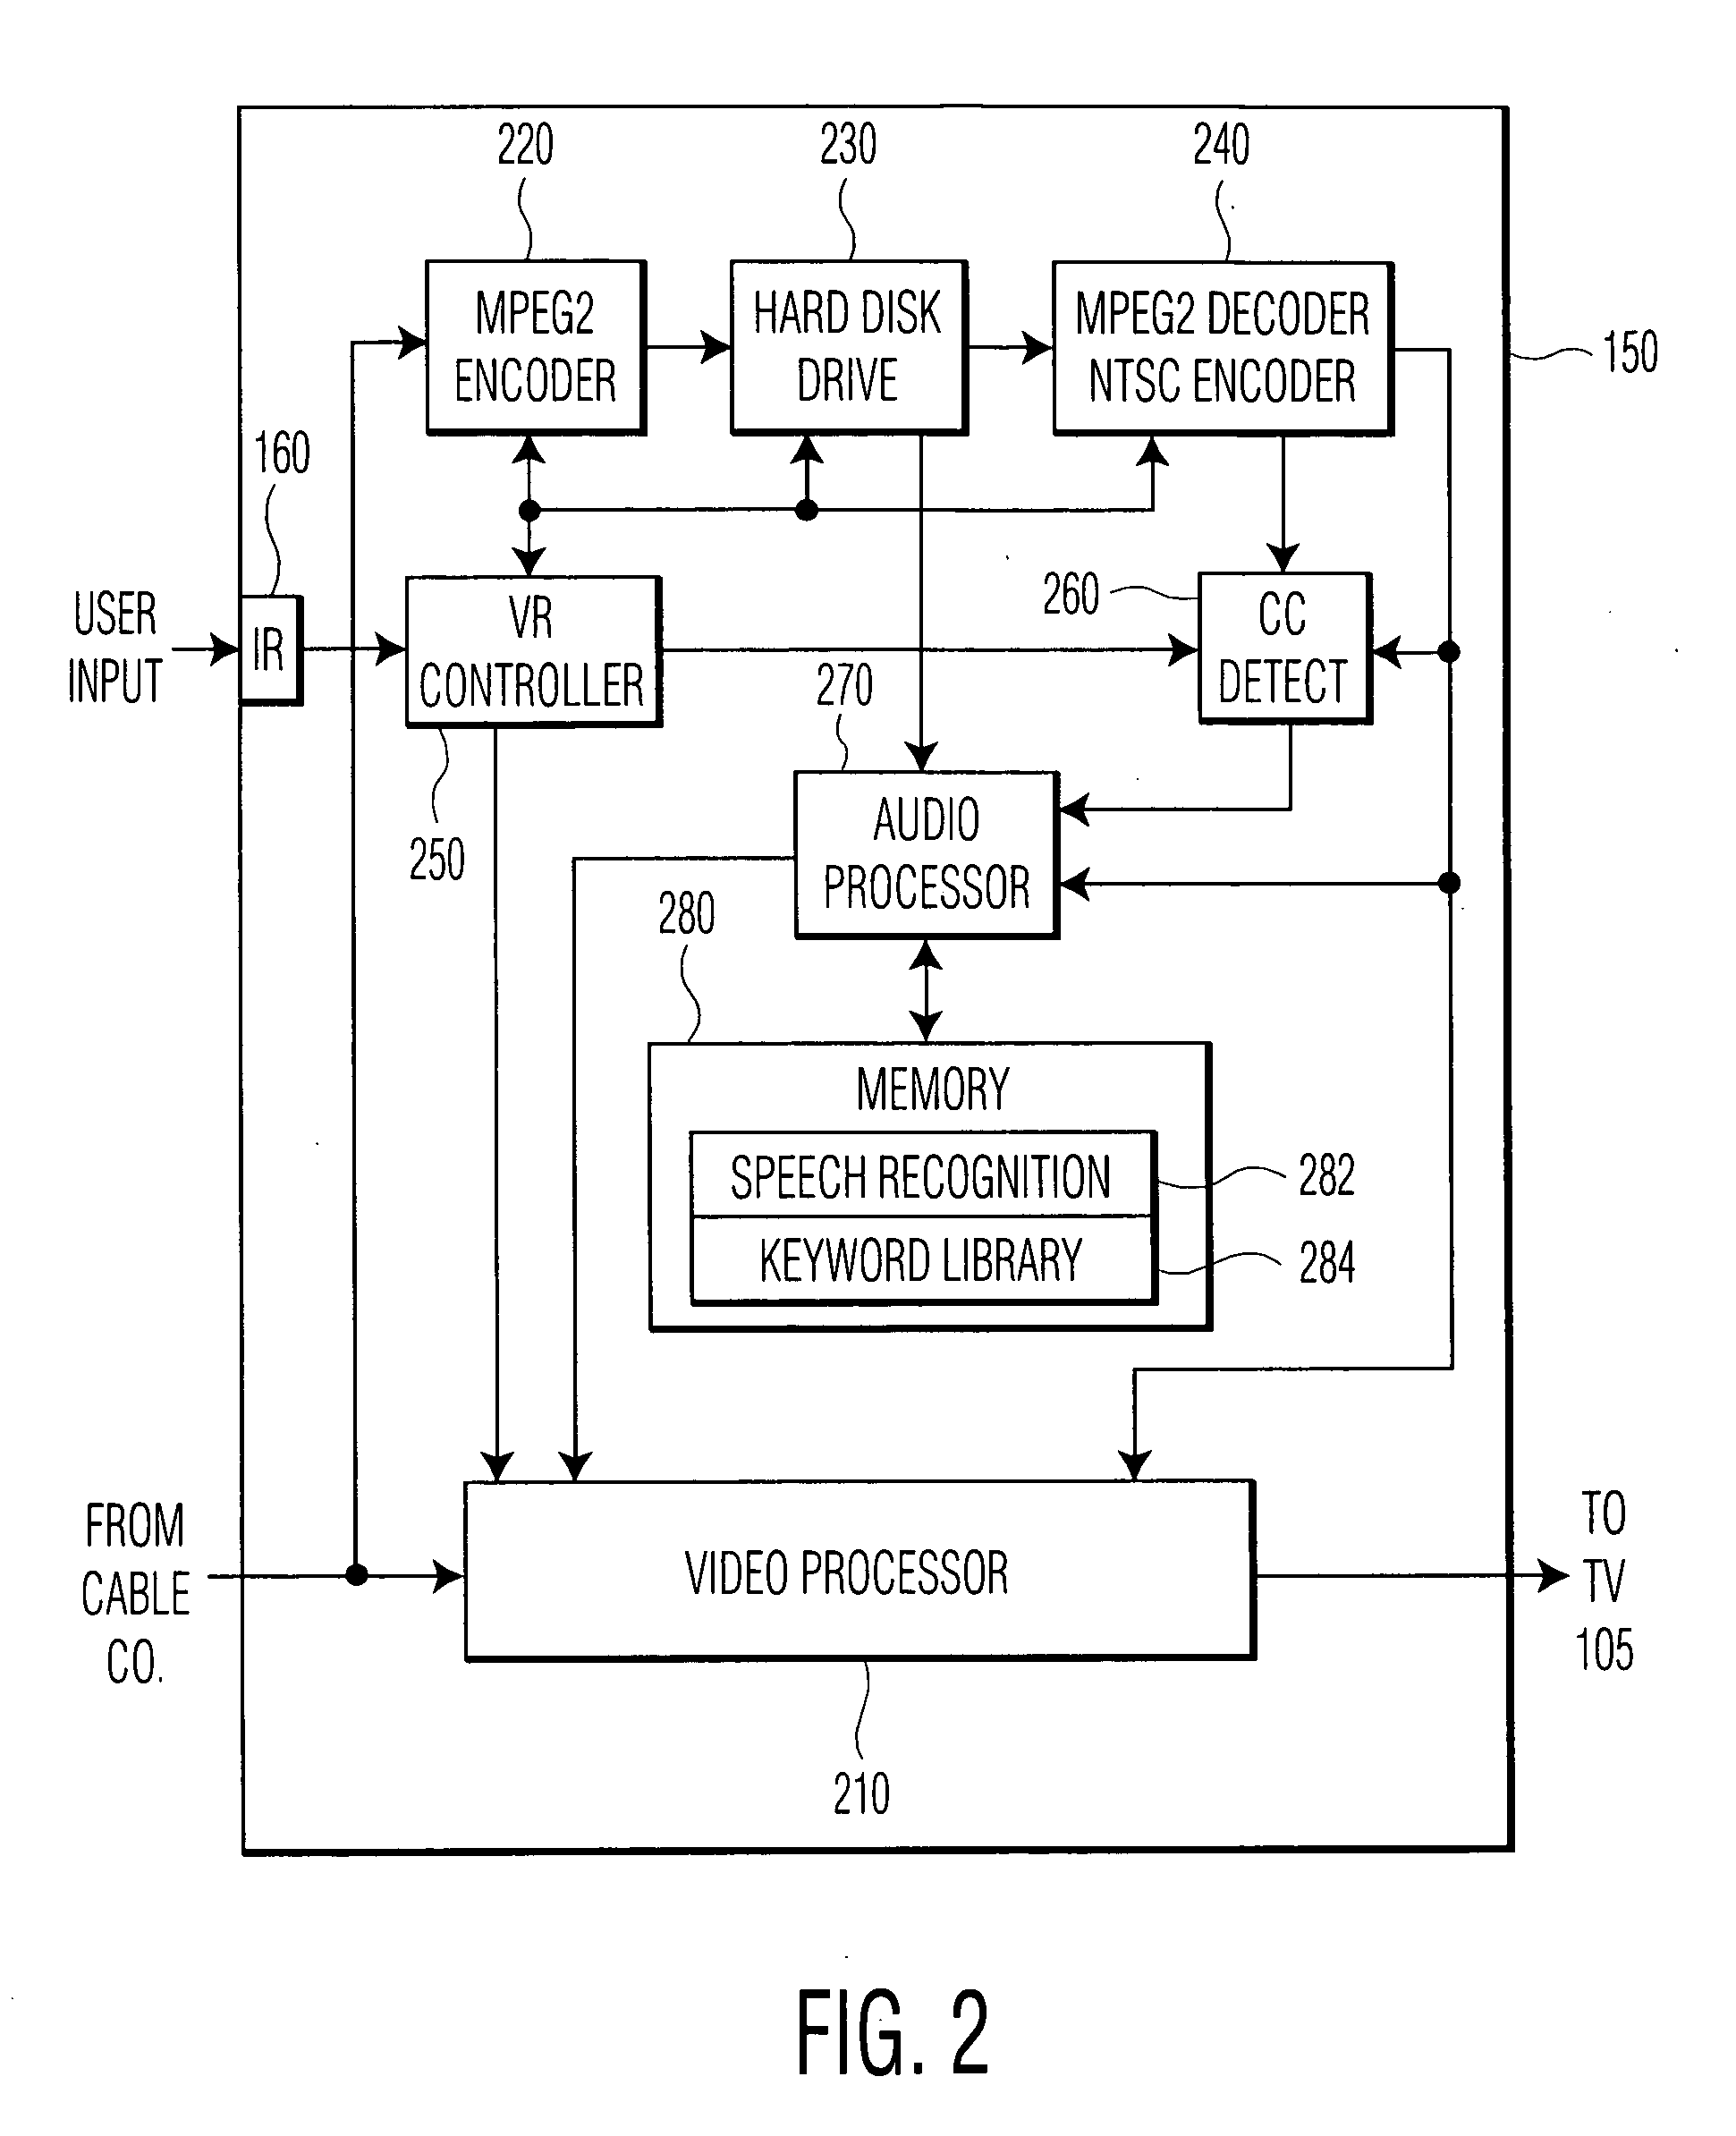 System and method for detecting highlights in a video program using audio properties